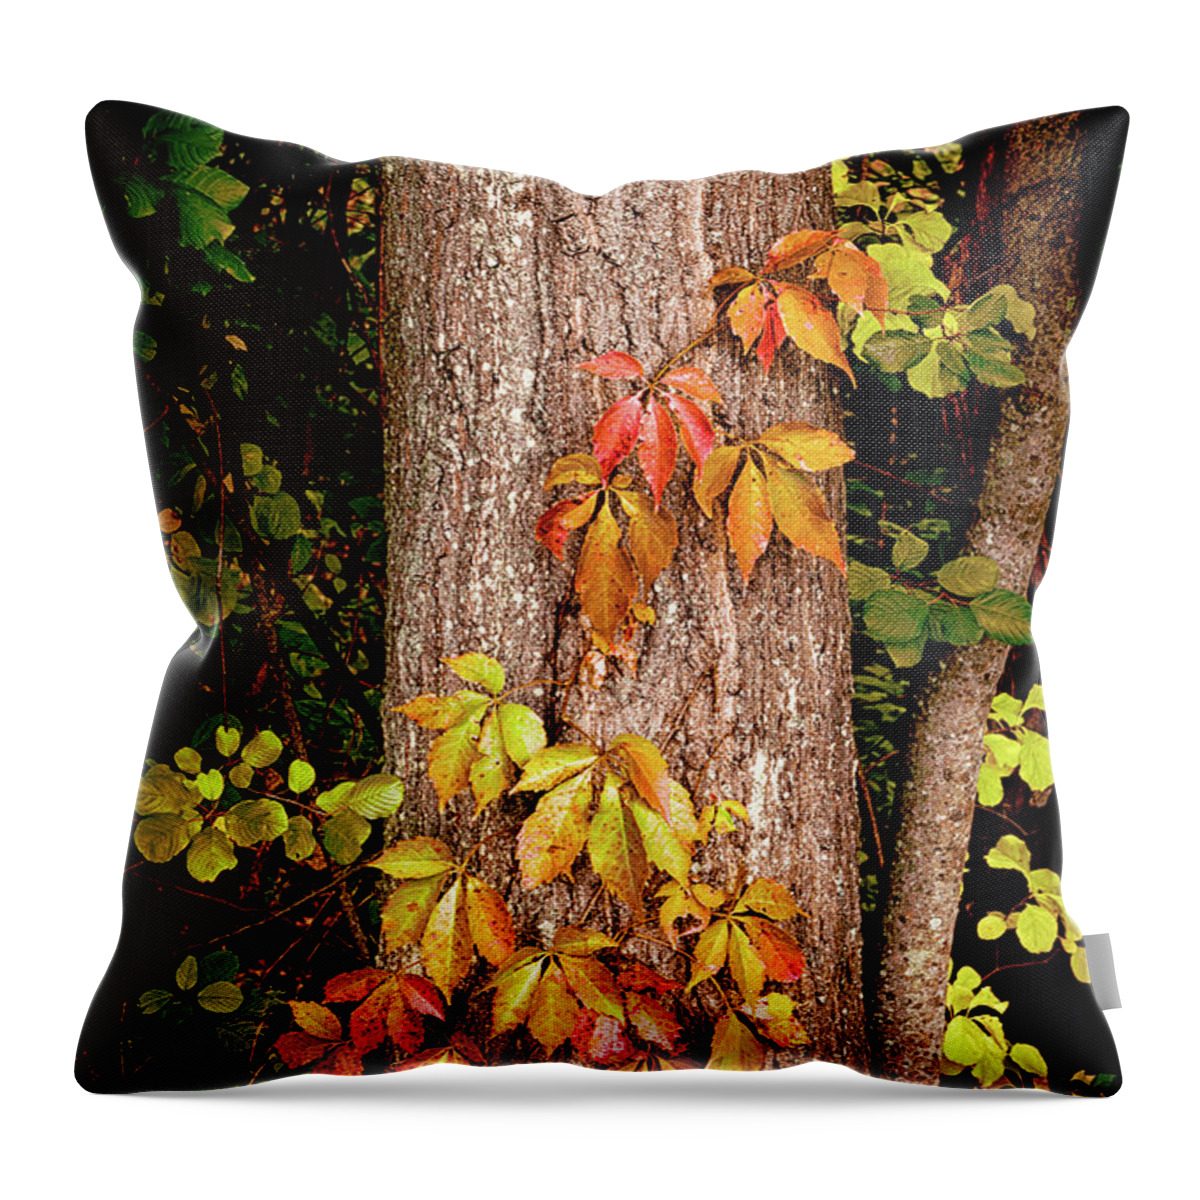 Tree Throw Pillow featuring the photograph Tree adornment by Camille Lopez